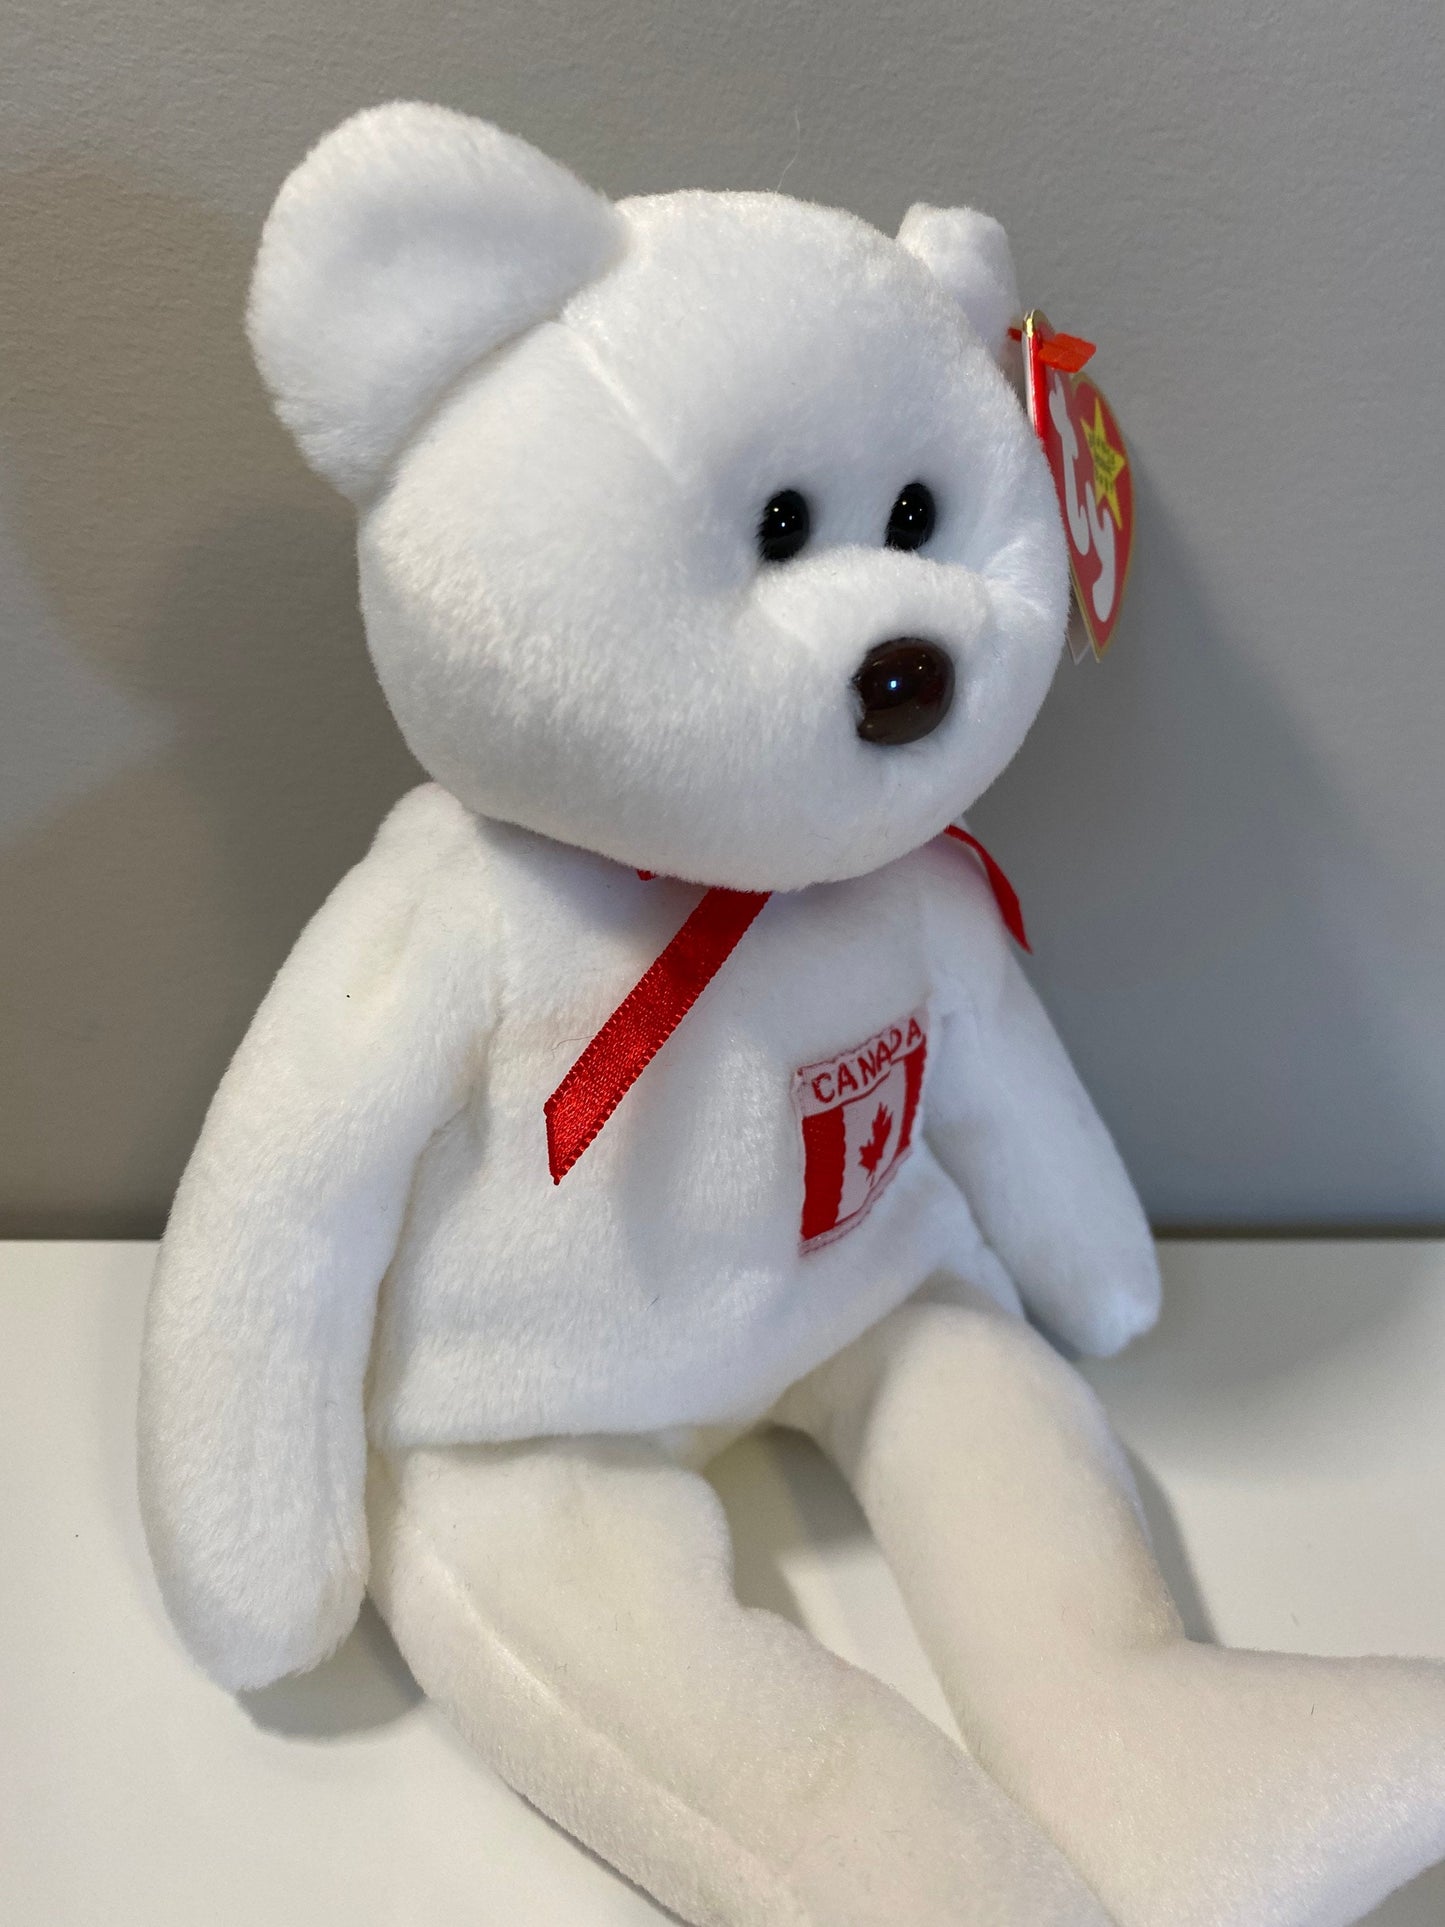 Ty Beanie Baby “Maple” the Canadian Bear - Canada Exclusive! (8.5 inch)